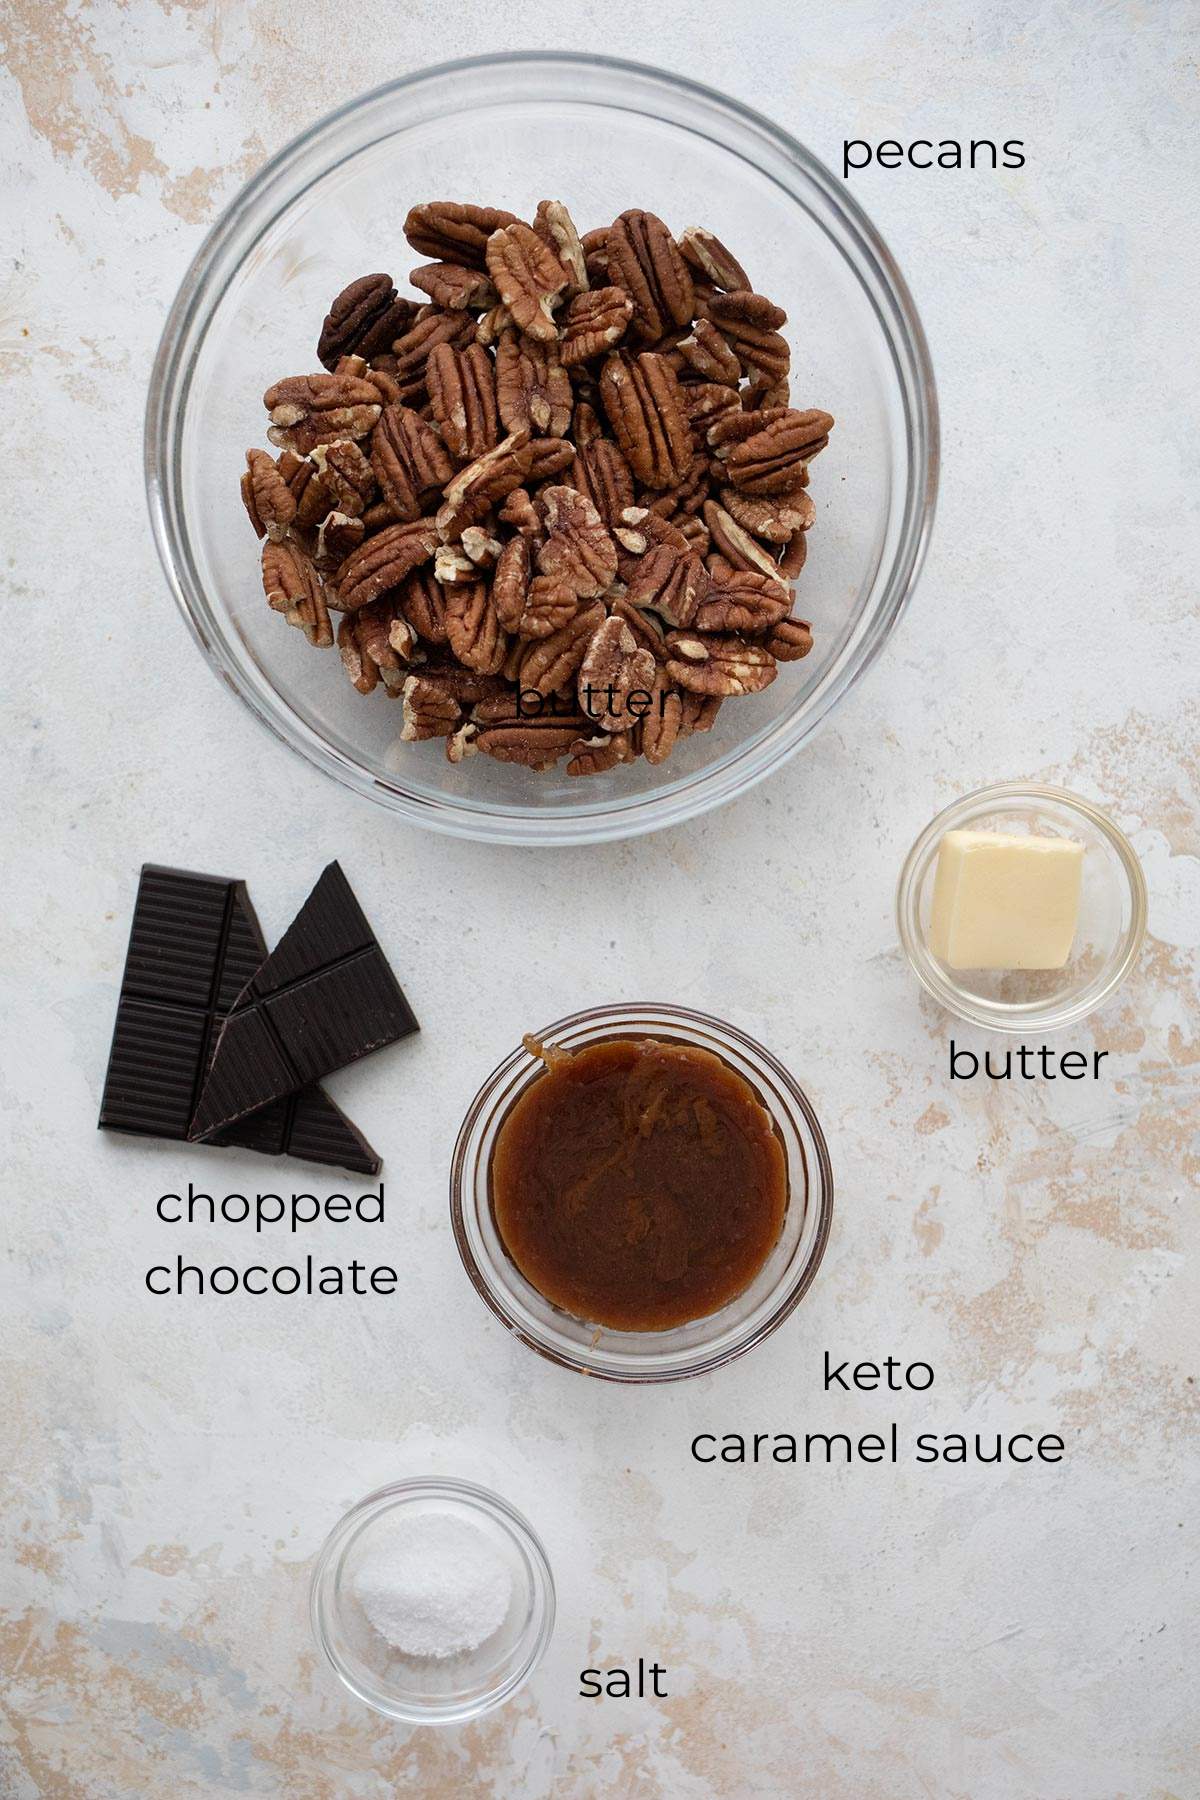 Top down image of the ingredients needed for Keto Turtles Candies.